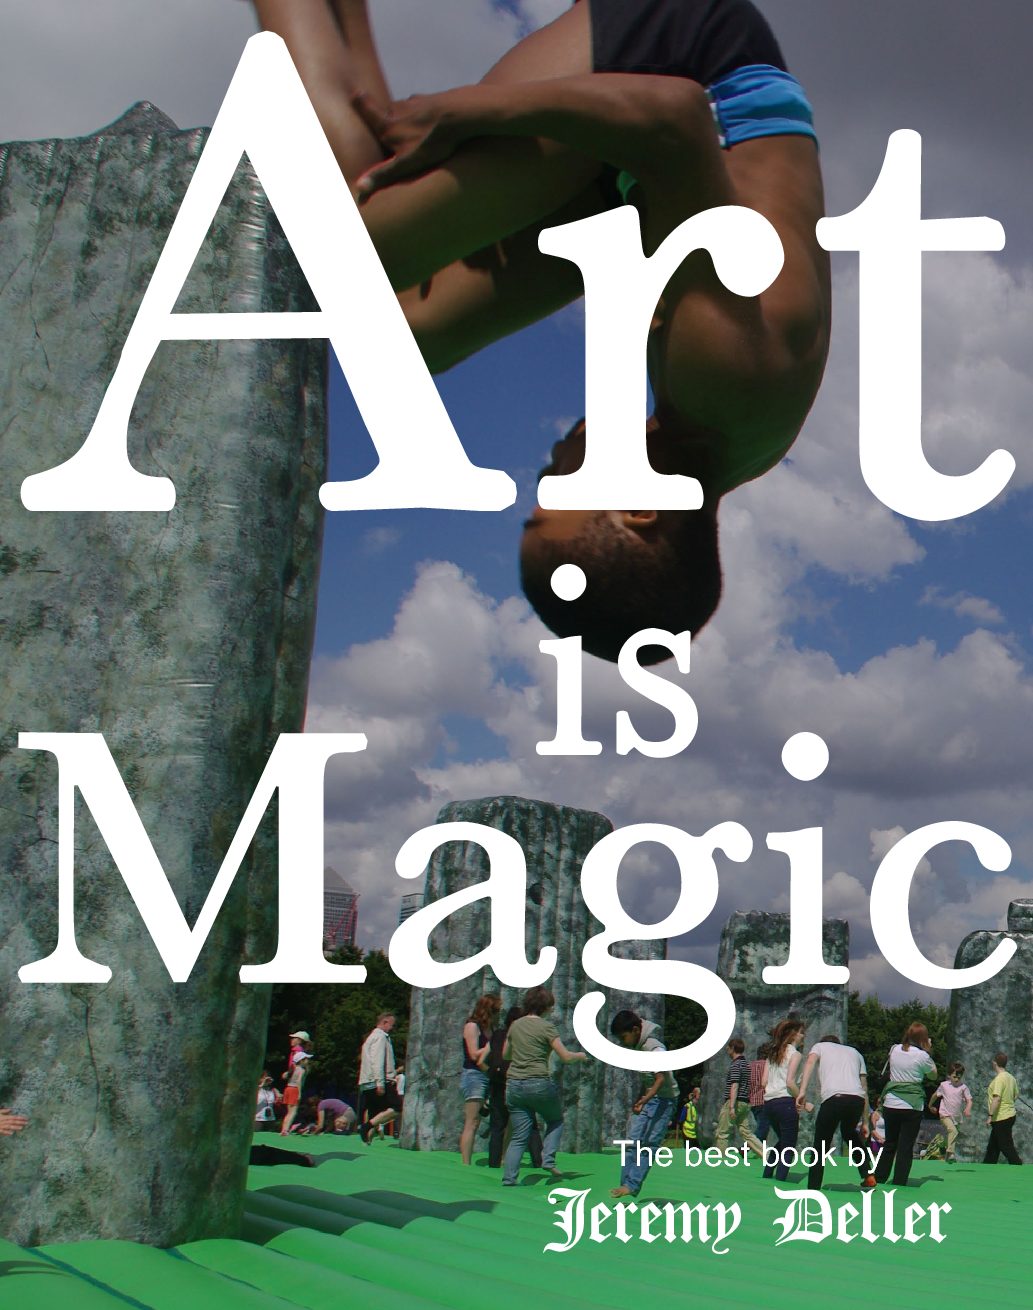 Jeremy Deller - Art is Magic: Monday 15th May 6-8pm